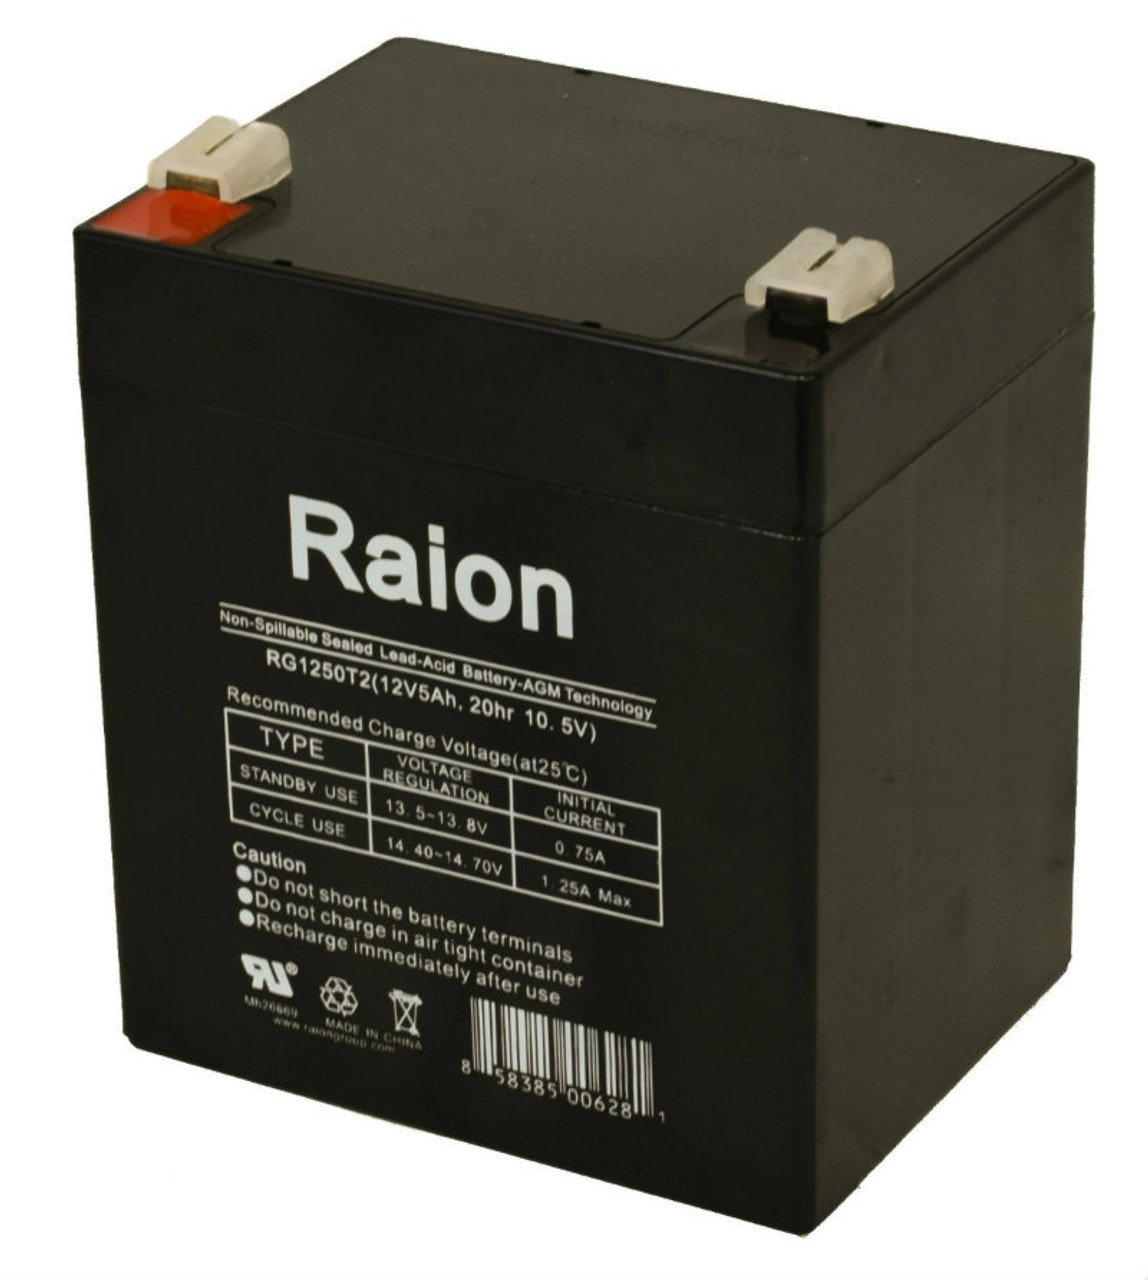 Raion Power RG1250T1 Replacement Battery for Bosfa DC12-5